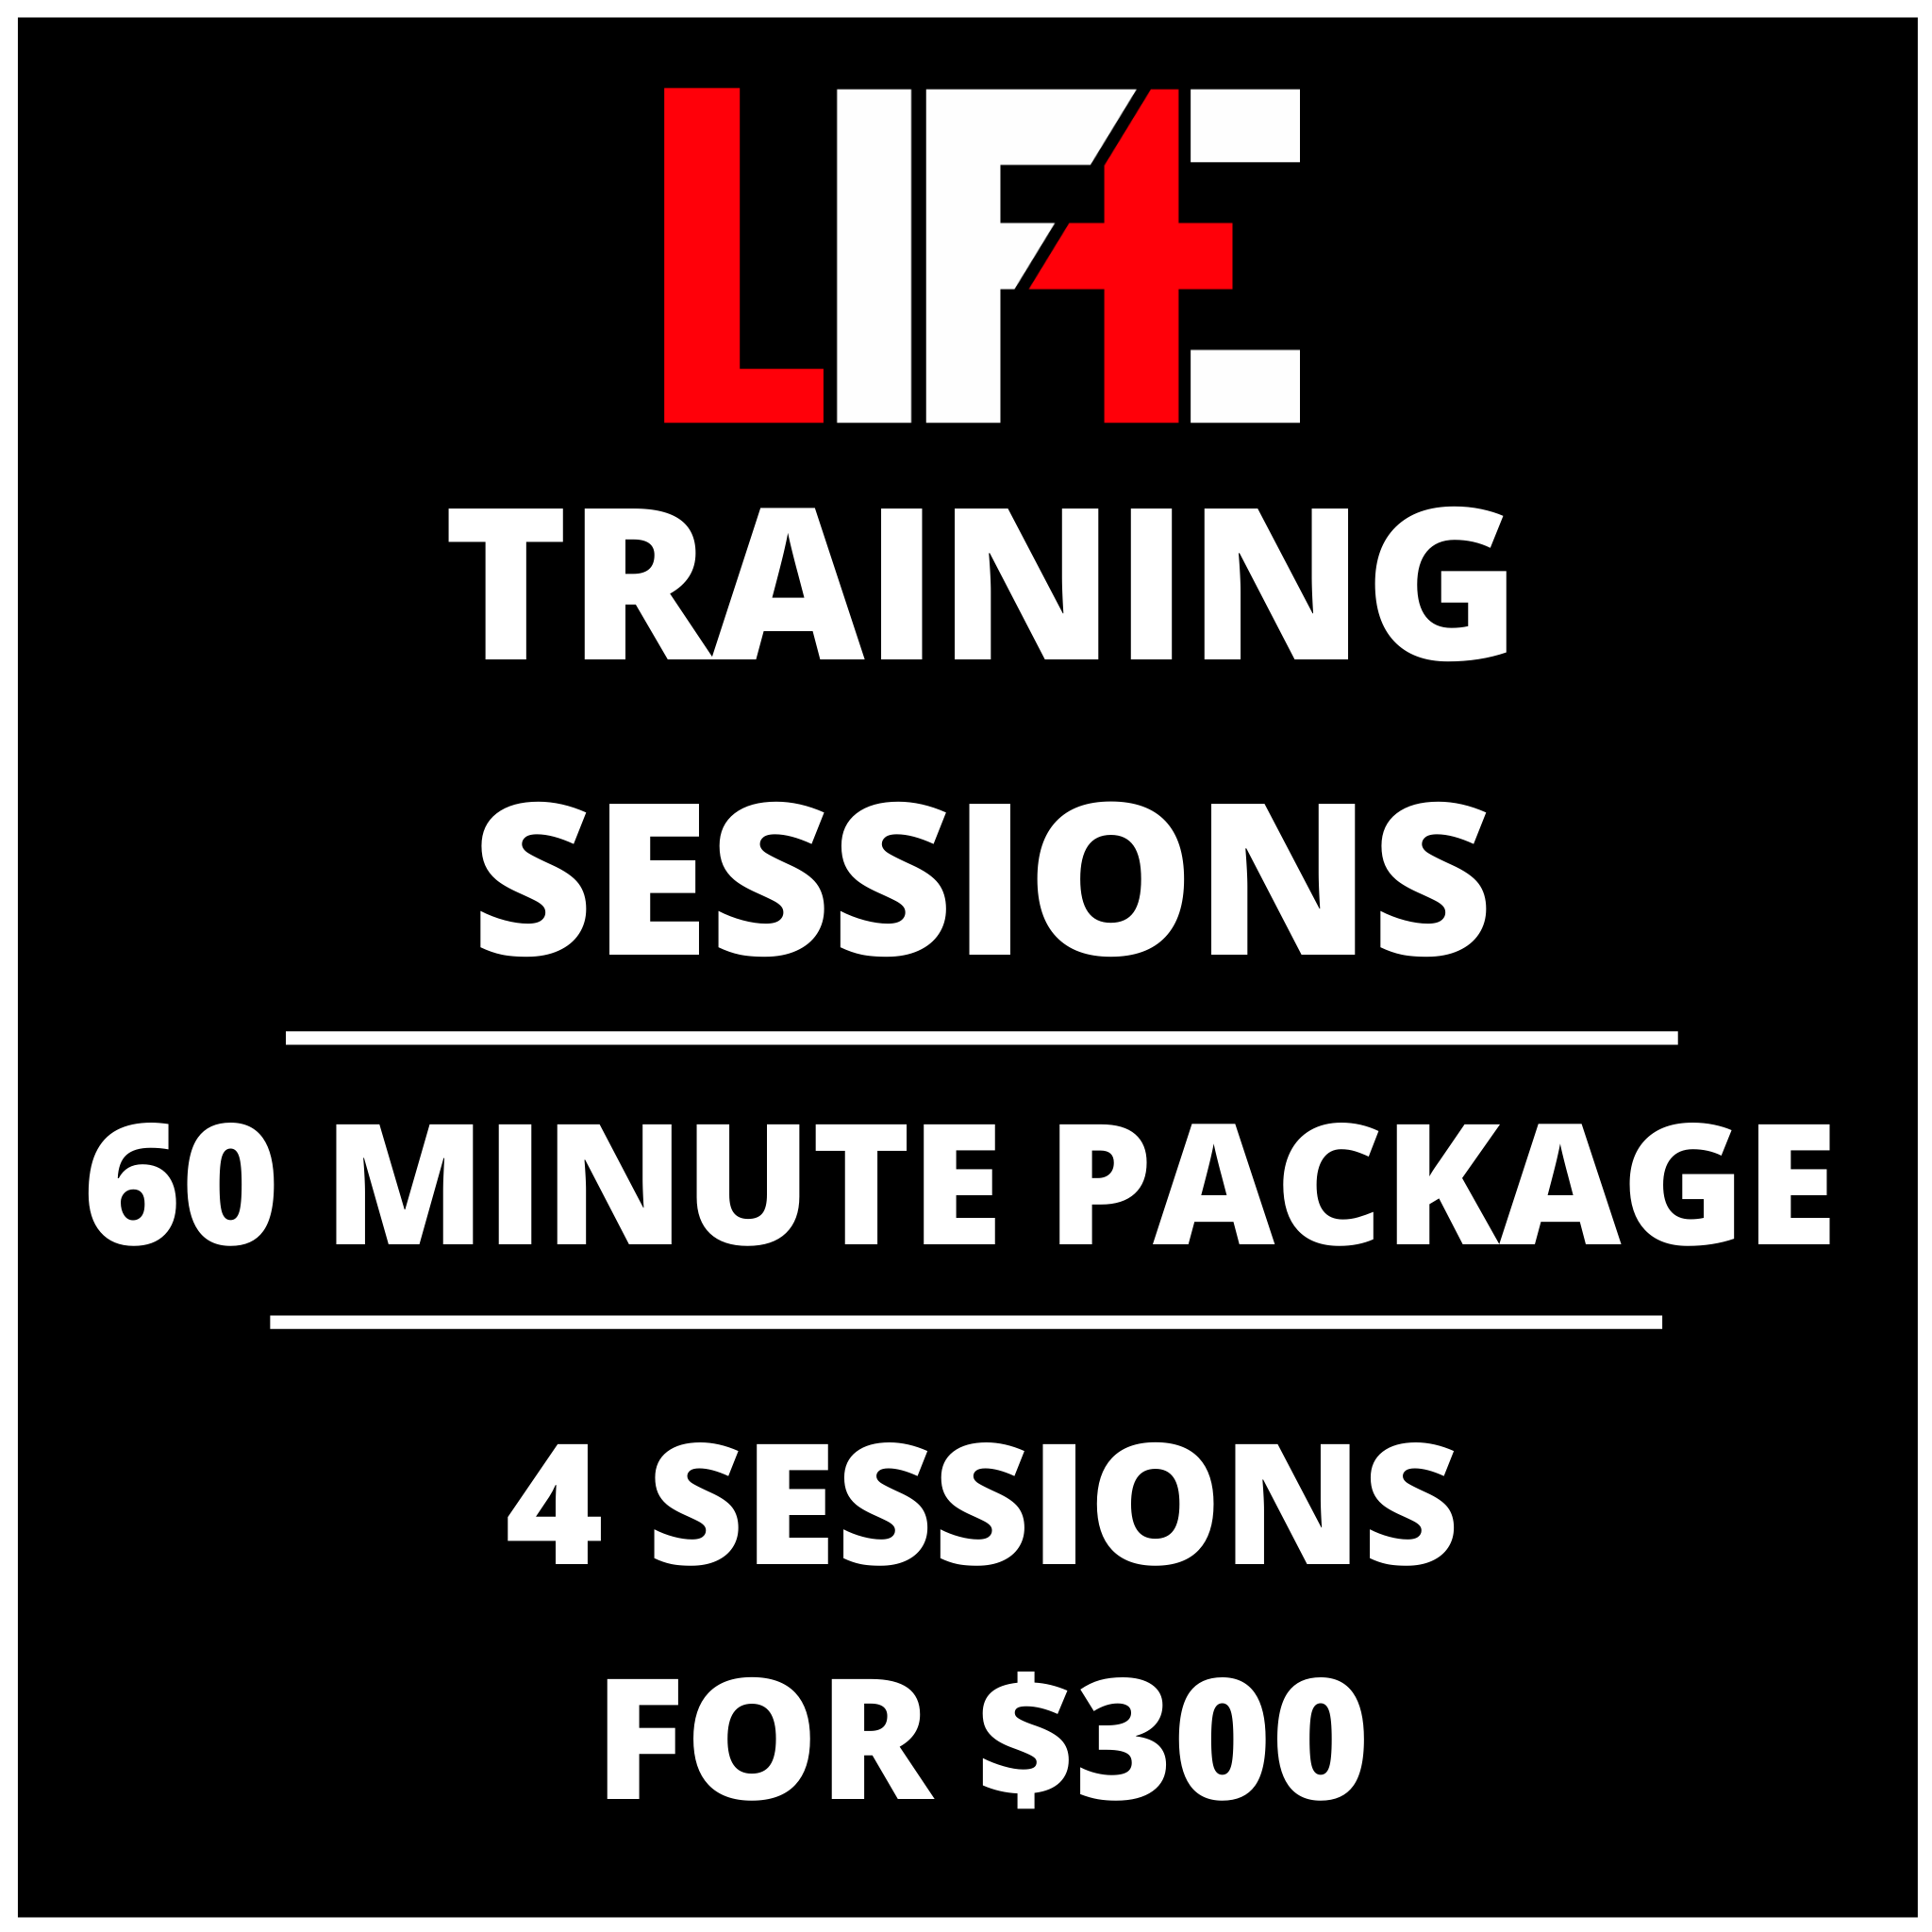 LIFTE Lab Training Sessions (4 x 60 Minutes)